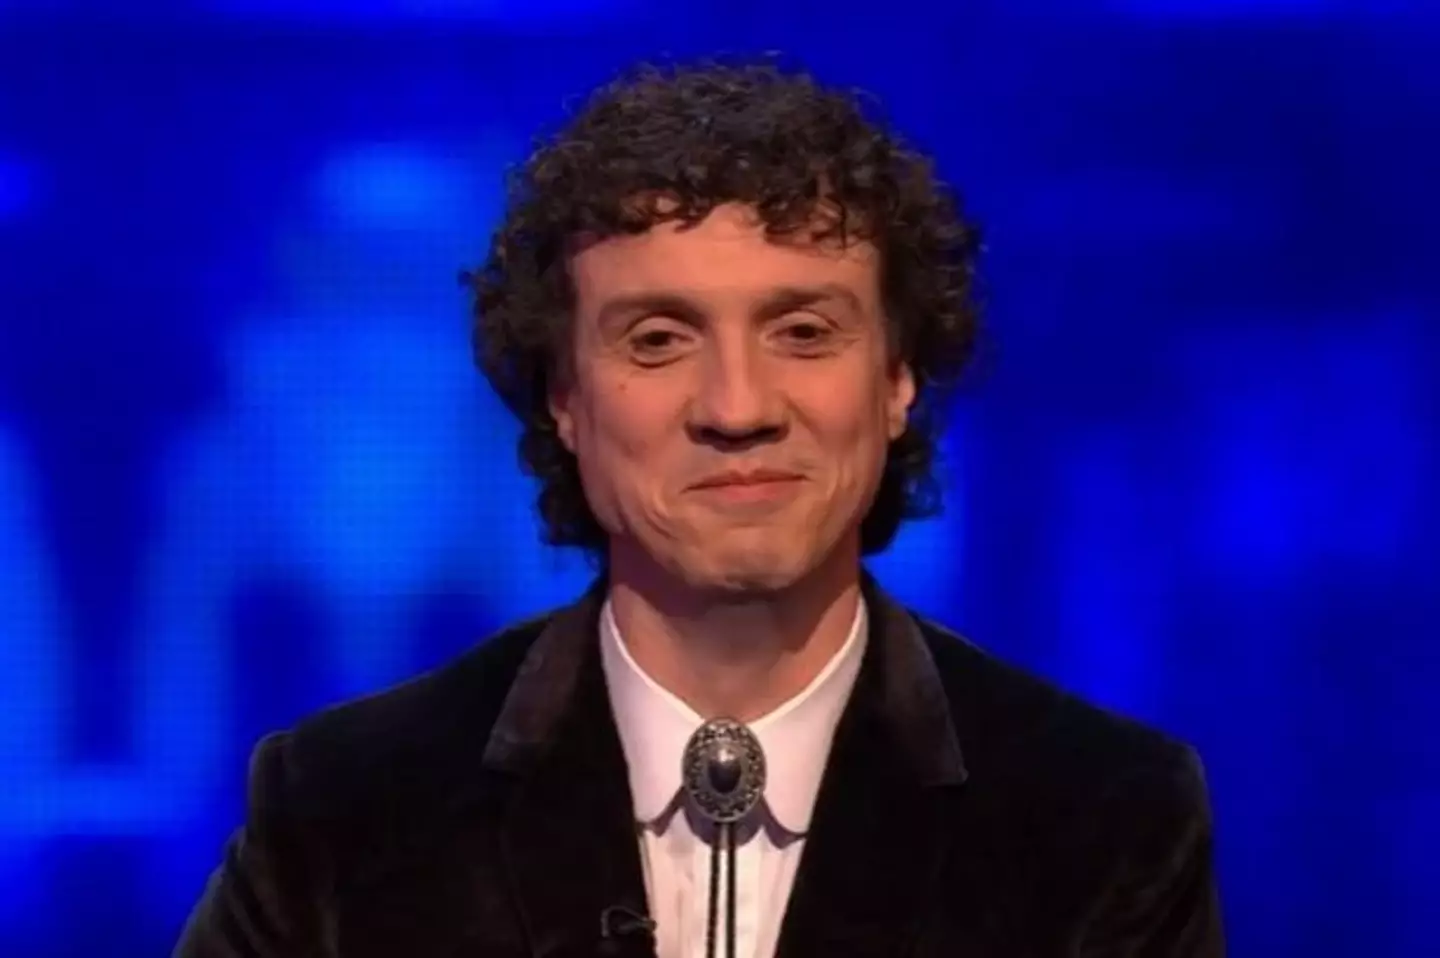 Darragh Ennis joined the chase in December 2020 (ITV)